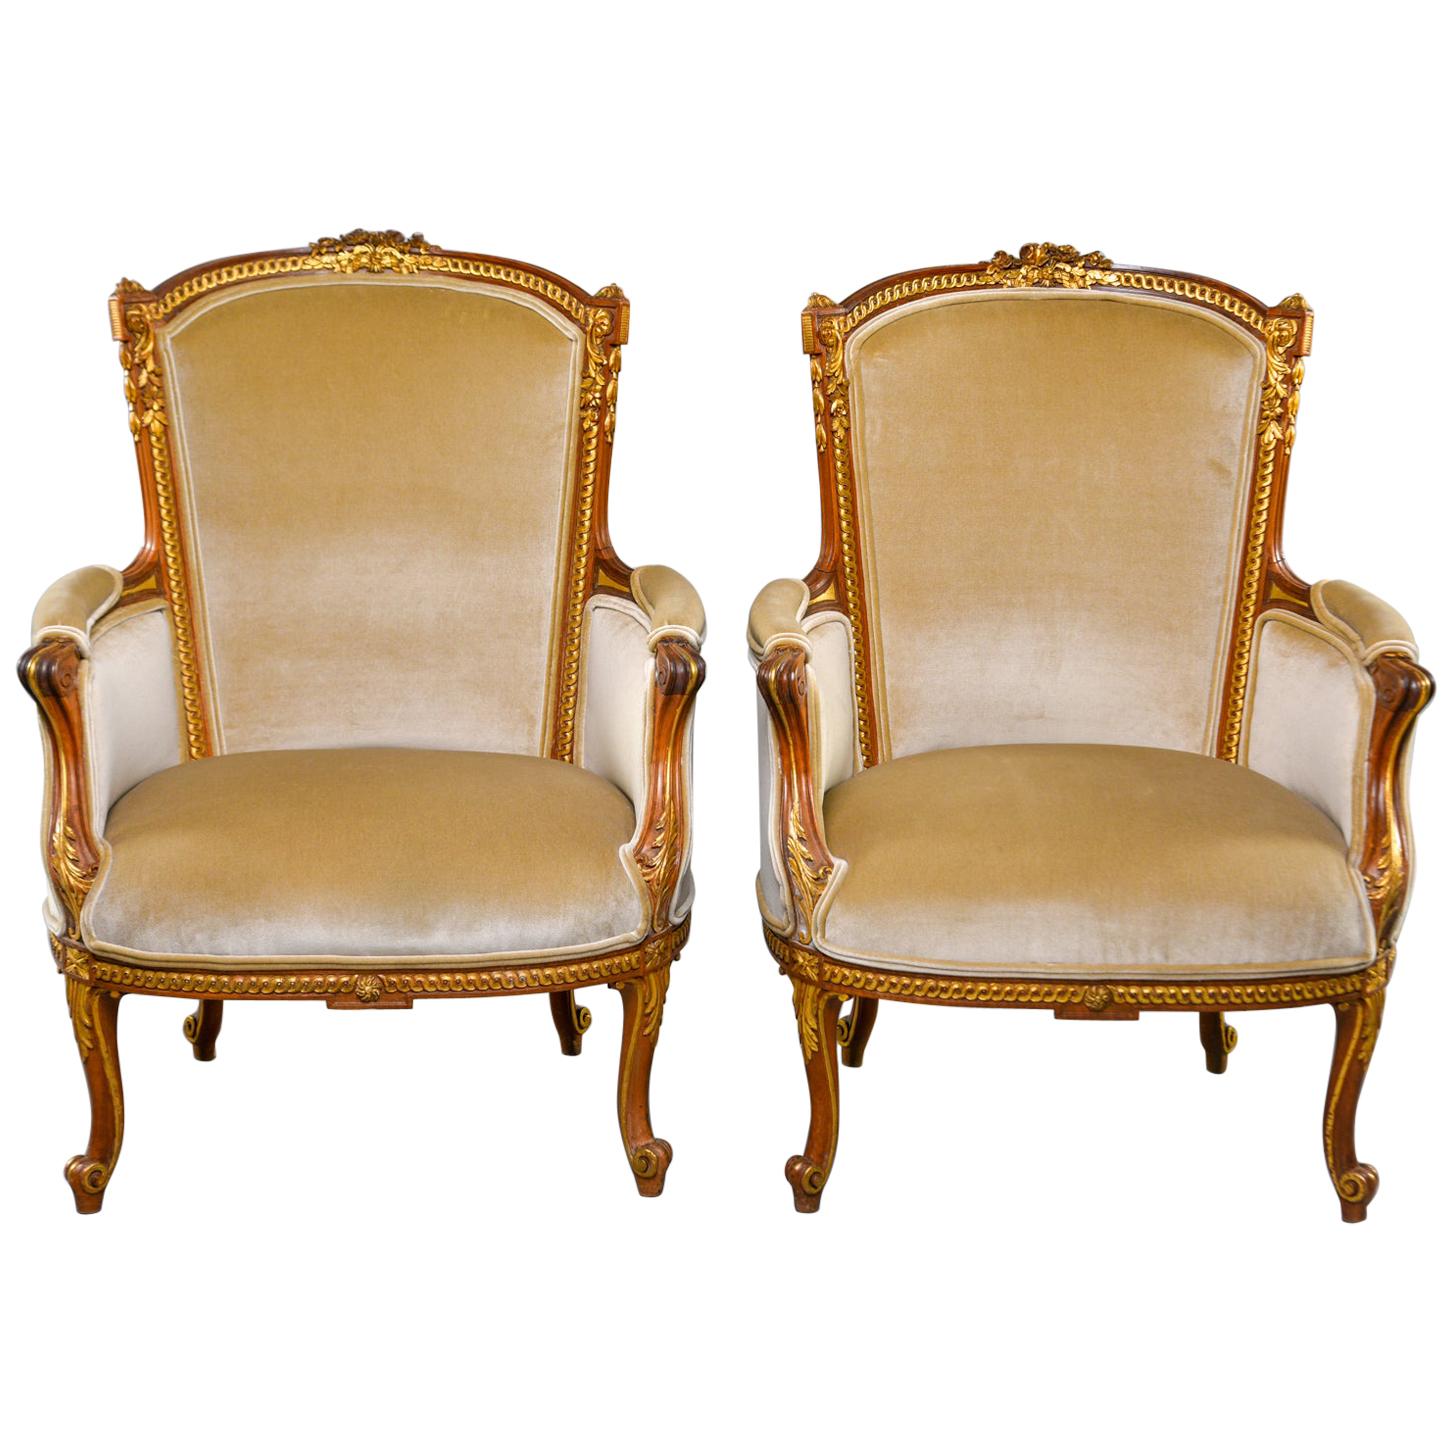 Pair of Early 20th Century Louis XV French Walnut and Gilt Chairs